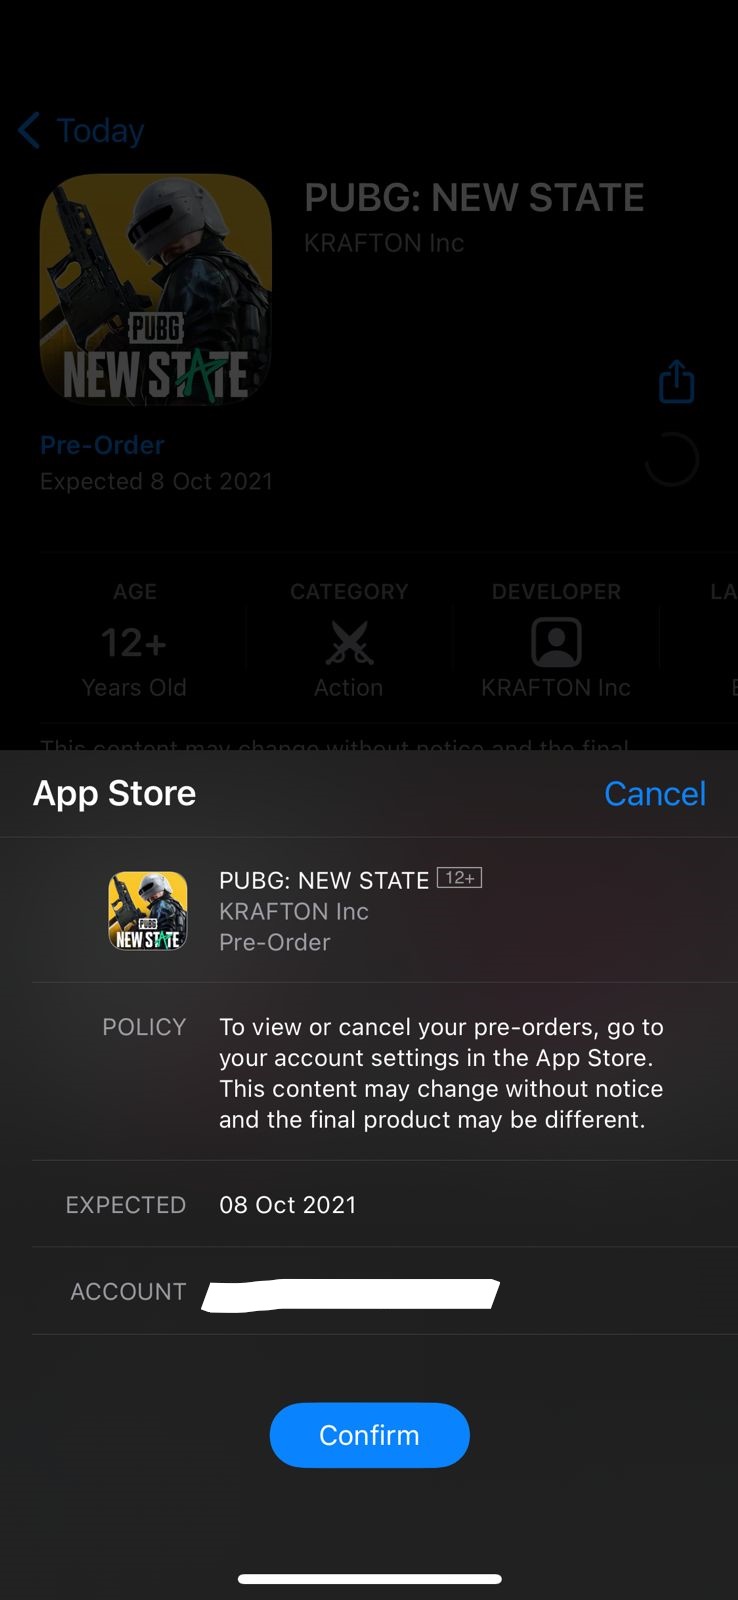 How to Pre-Register PUBG: NEW STATE